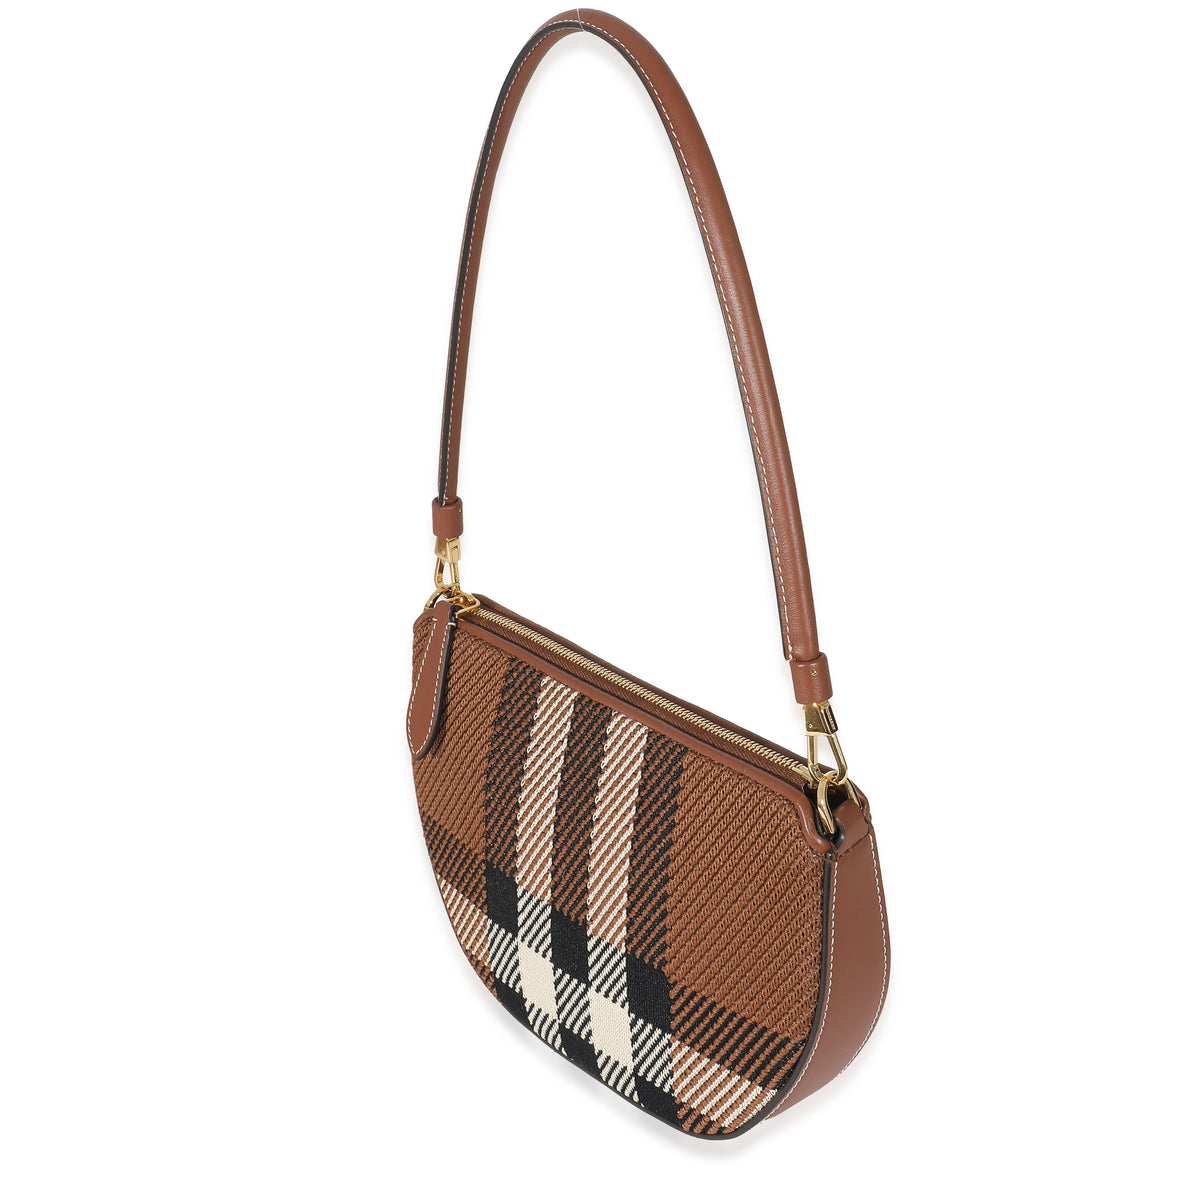 BURBERRY: Olympia shoulder bag in vintage check canvas - Beige